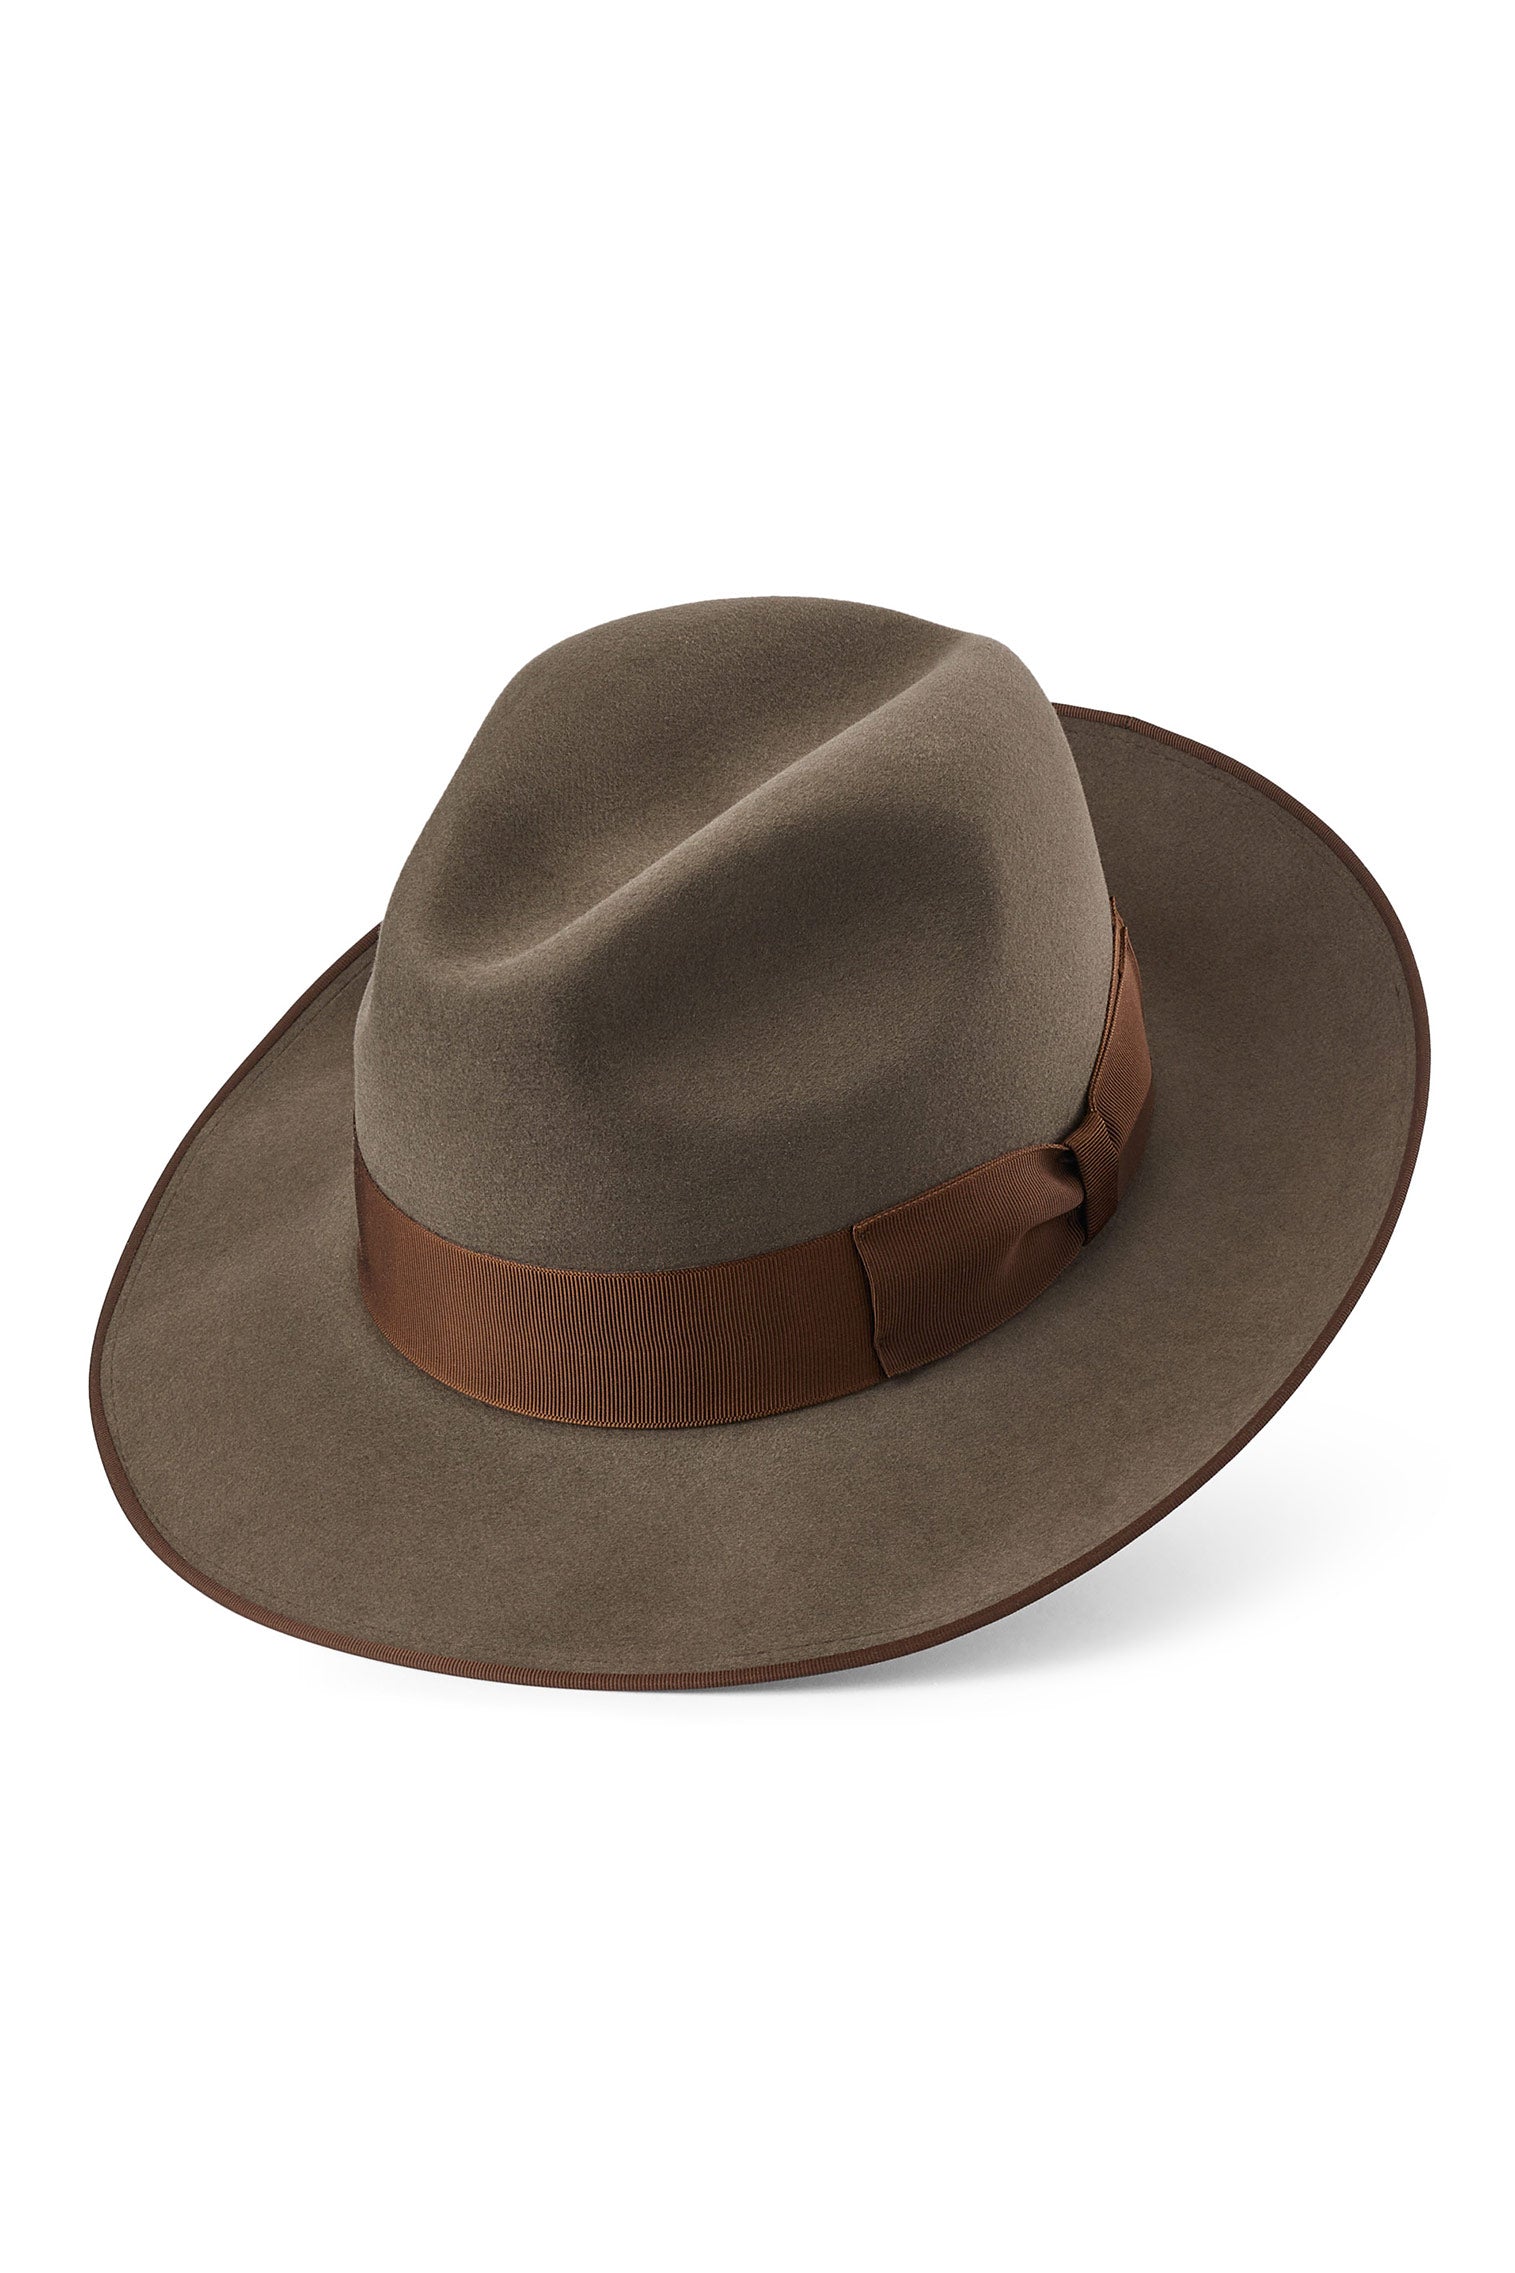 St James's Fedora - Hats for Tall People - Lock & Co. Hatters London UK